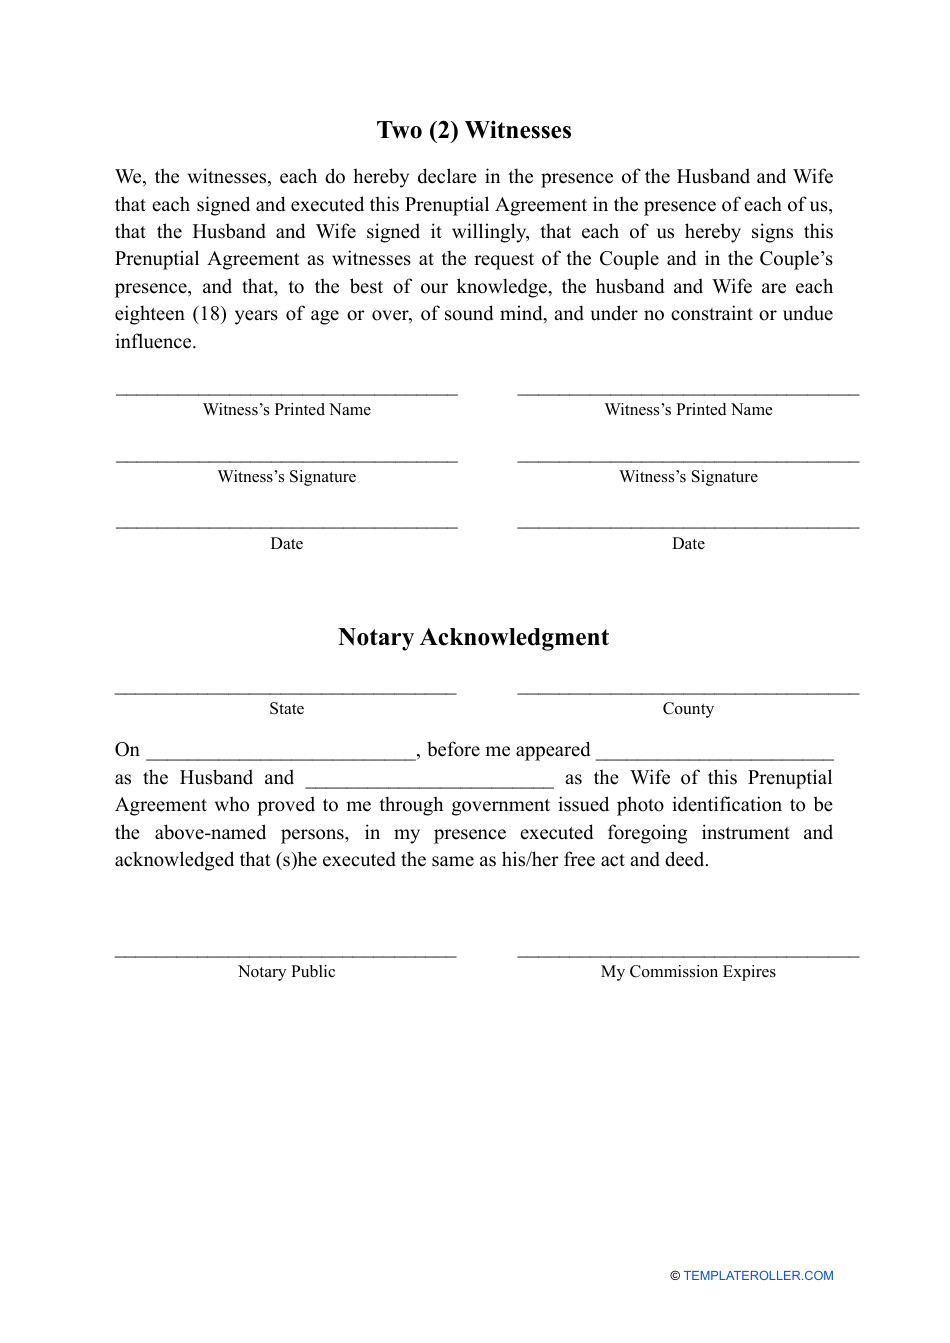 Florida Prenuptial Agreement Template Fill Out Sign Online and